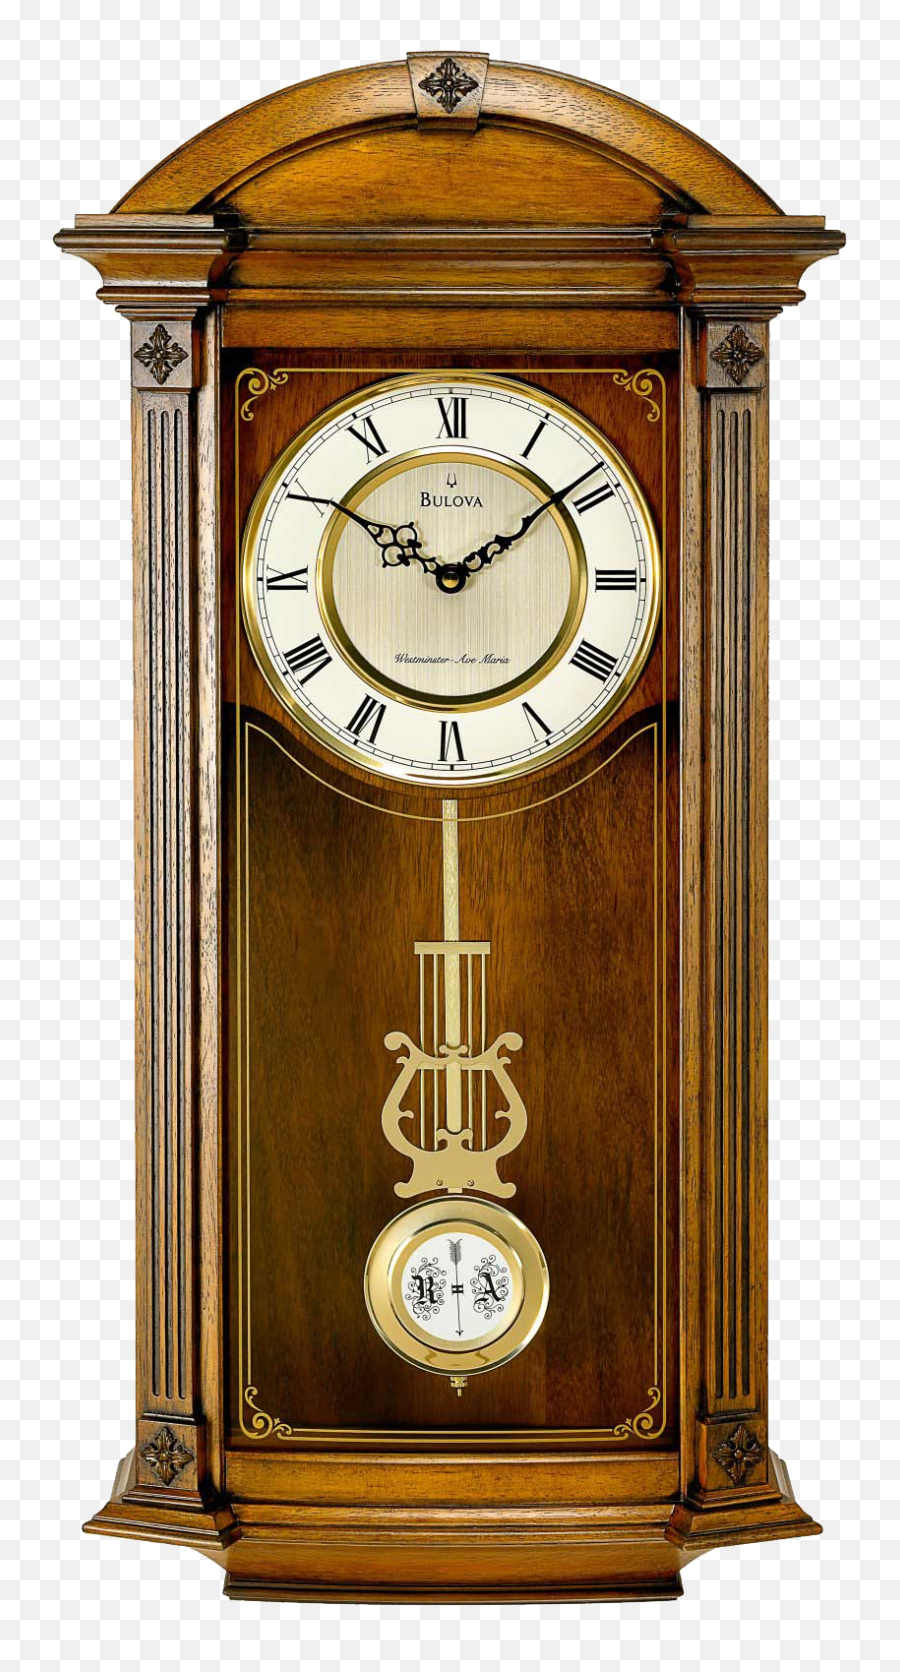 Download Wall Bell Clock Png Image For Free - Wall Bell Clock Png,Clocks Png